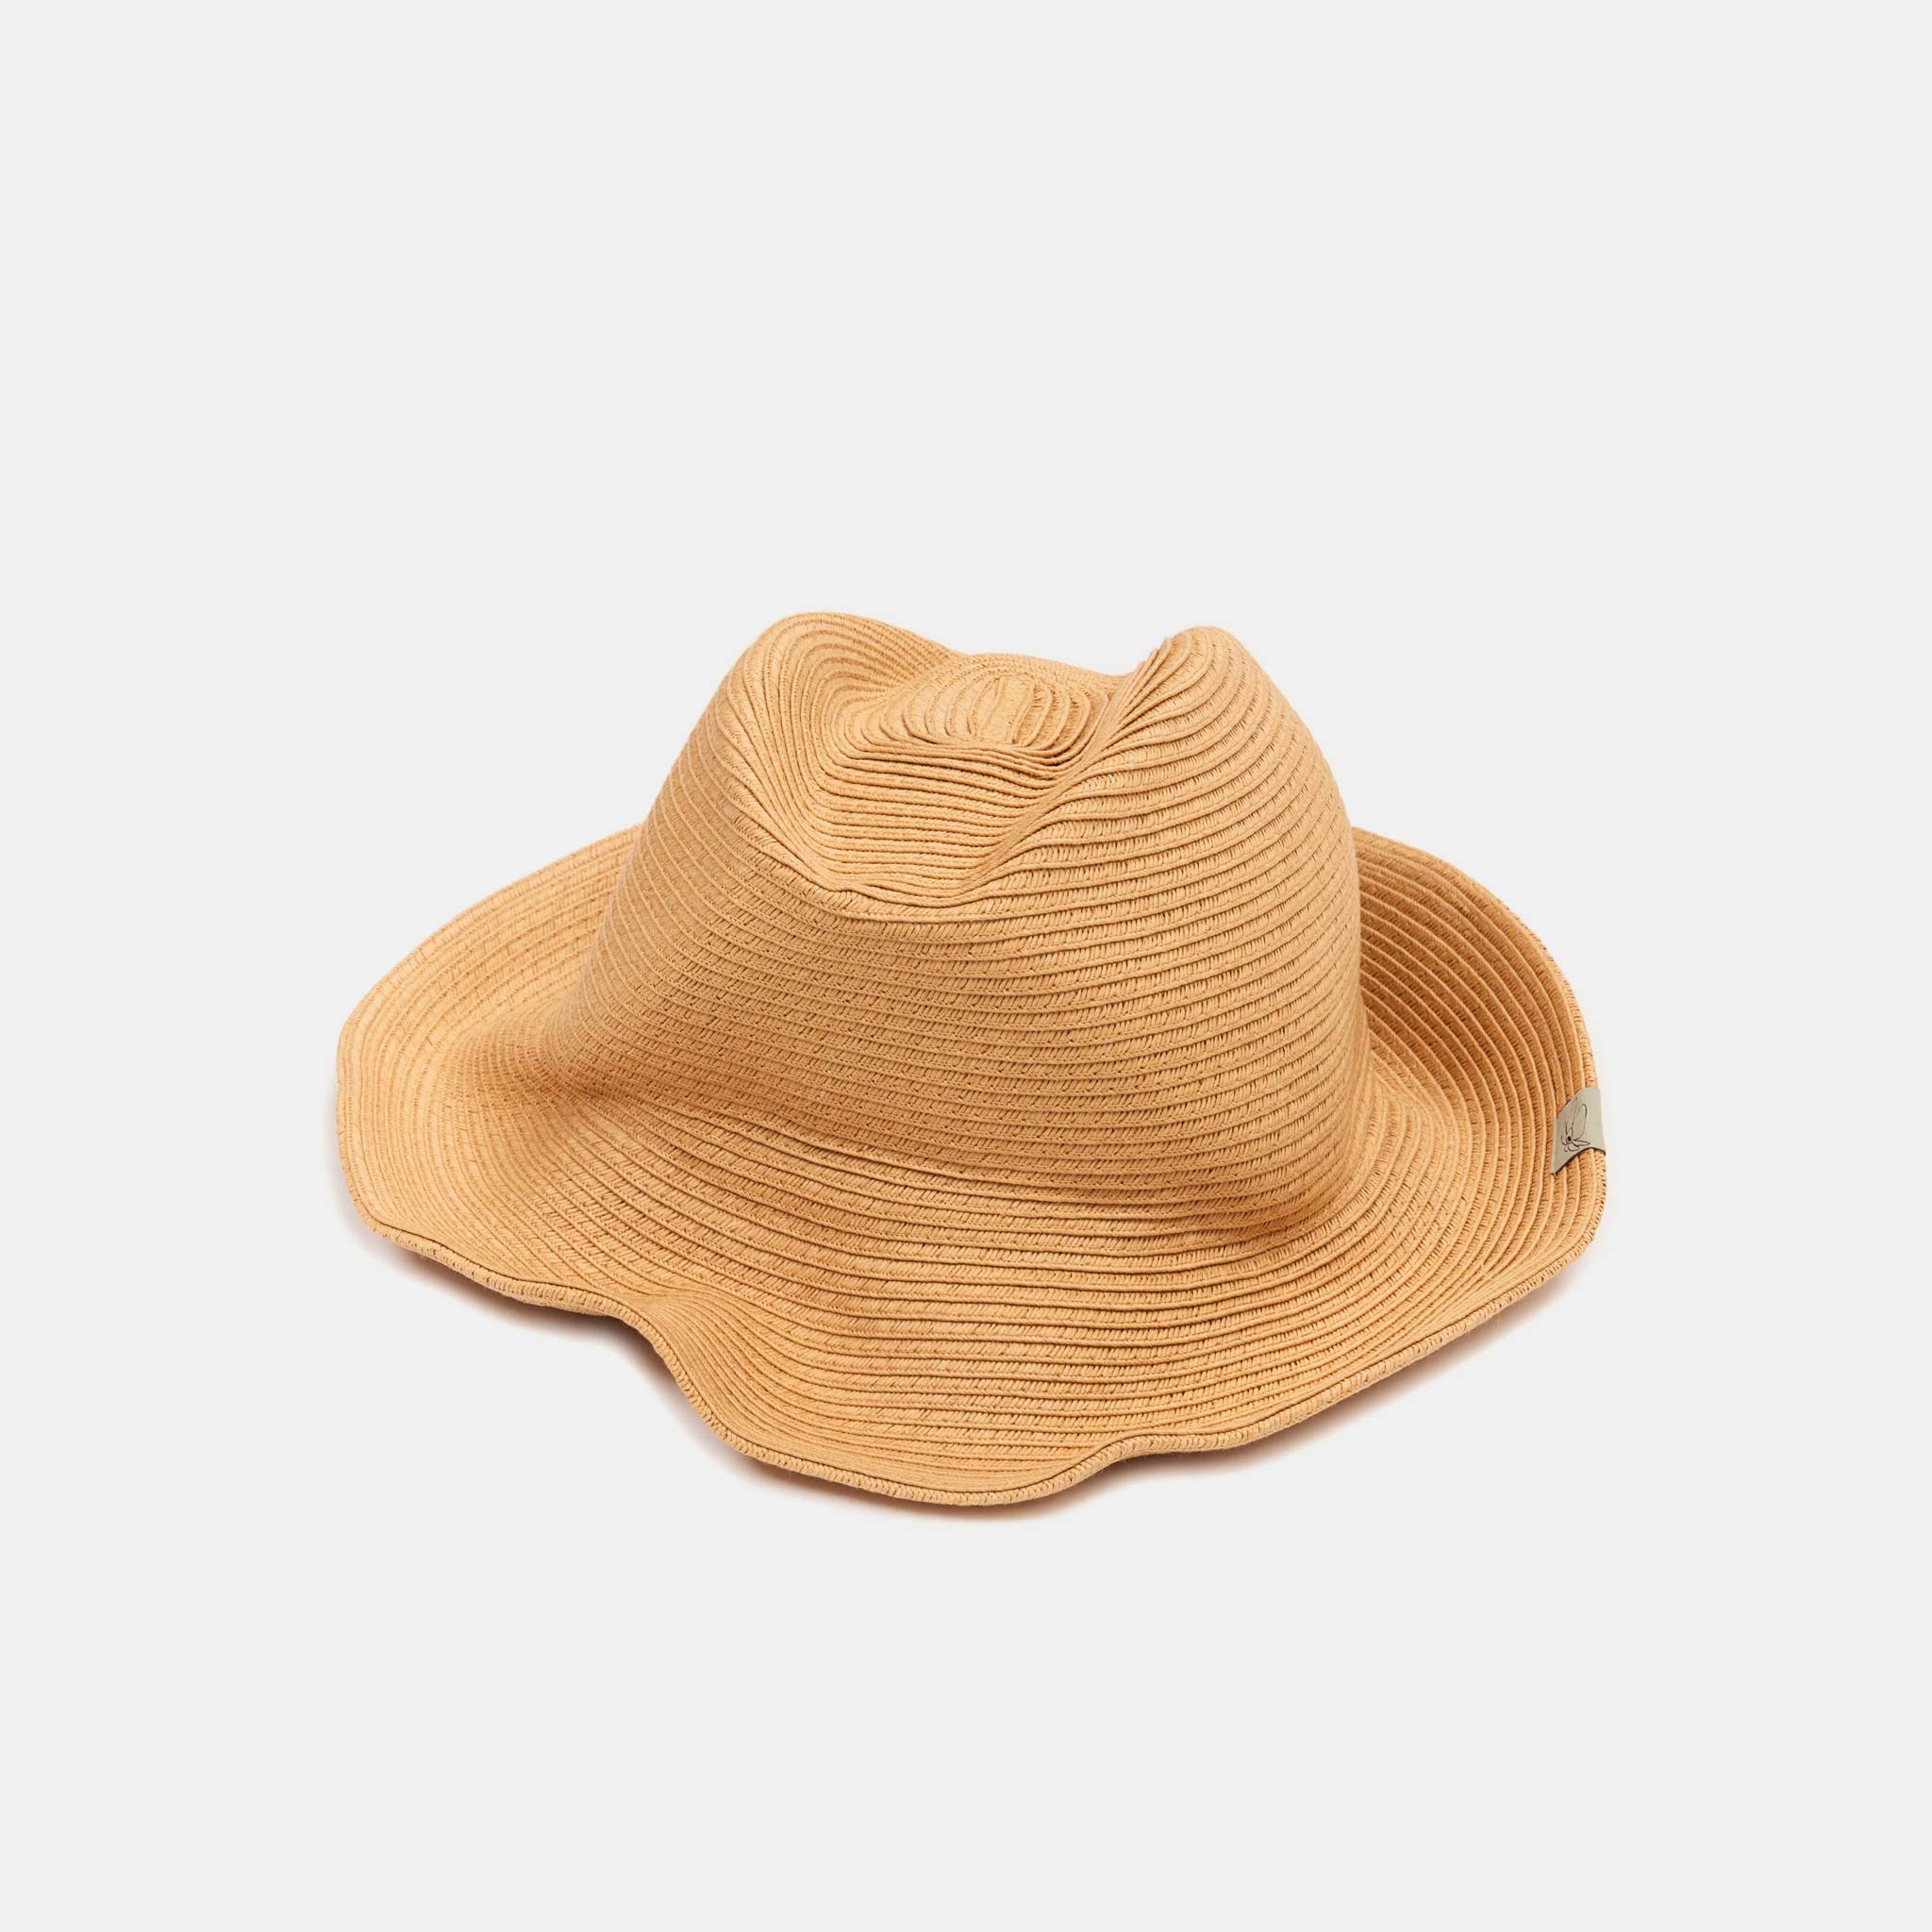 Flat photo showing a tan warped hat with a tonal concentric circle design that mimics a vinyl record's grooves.